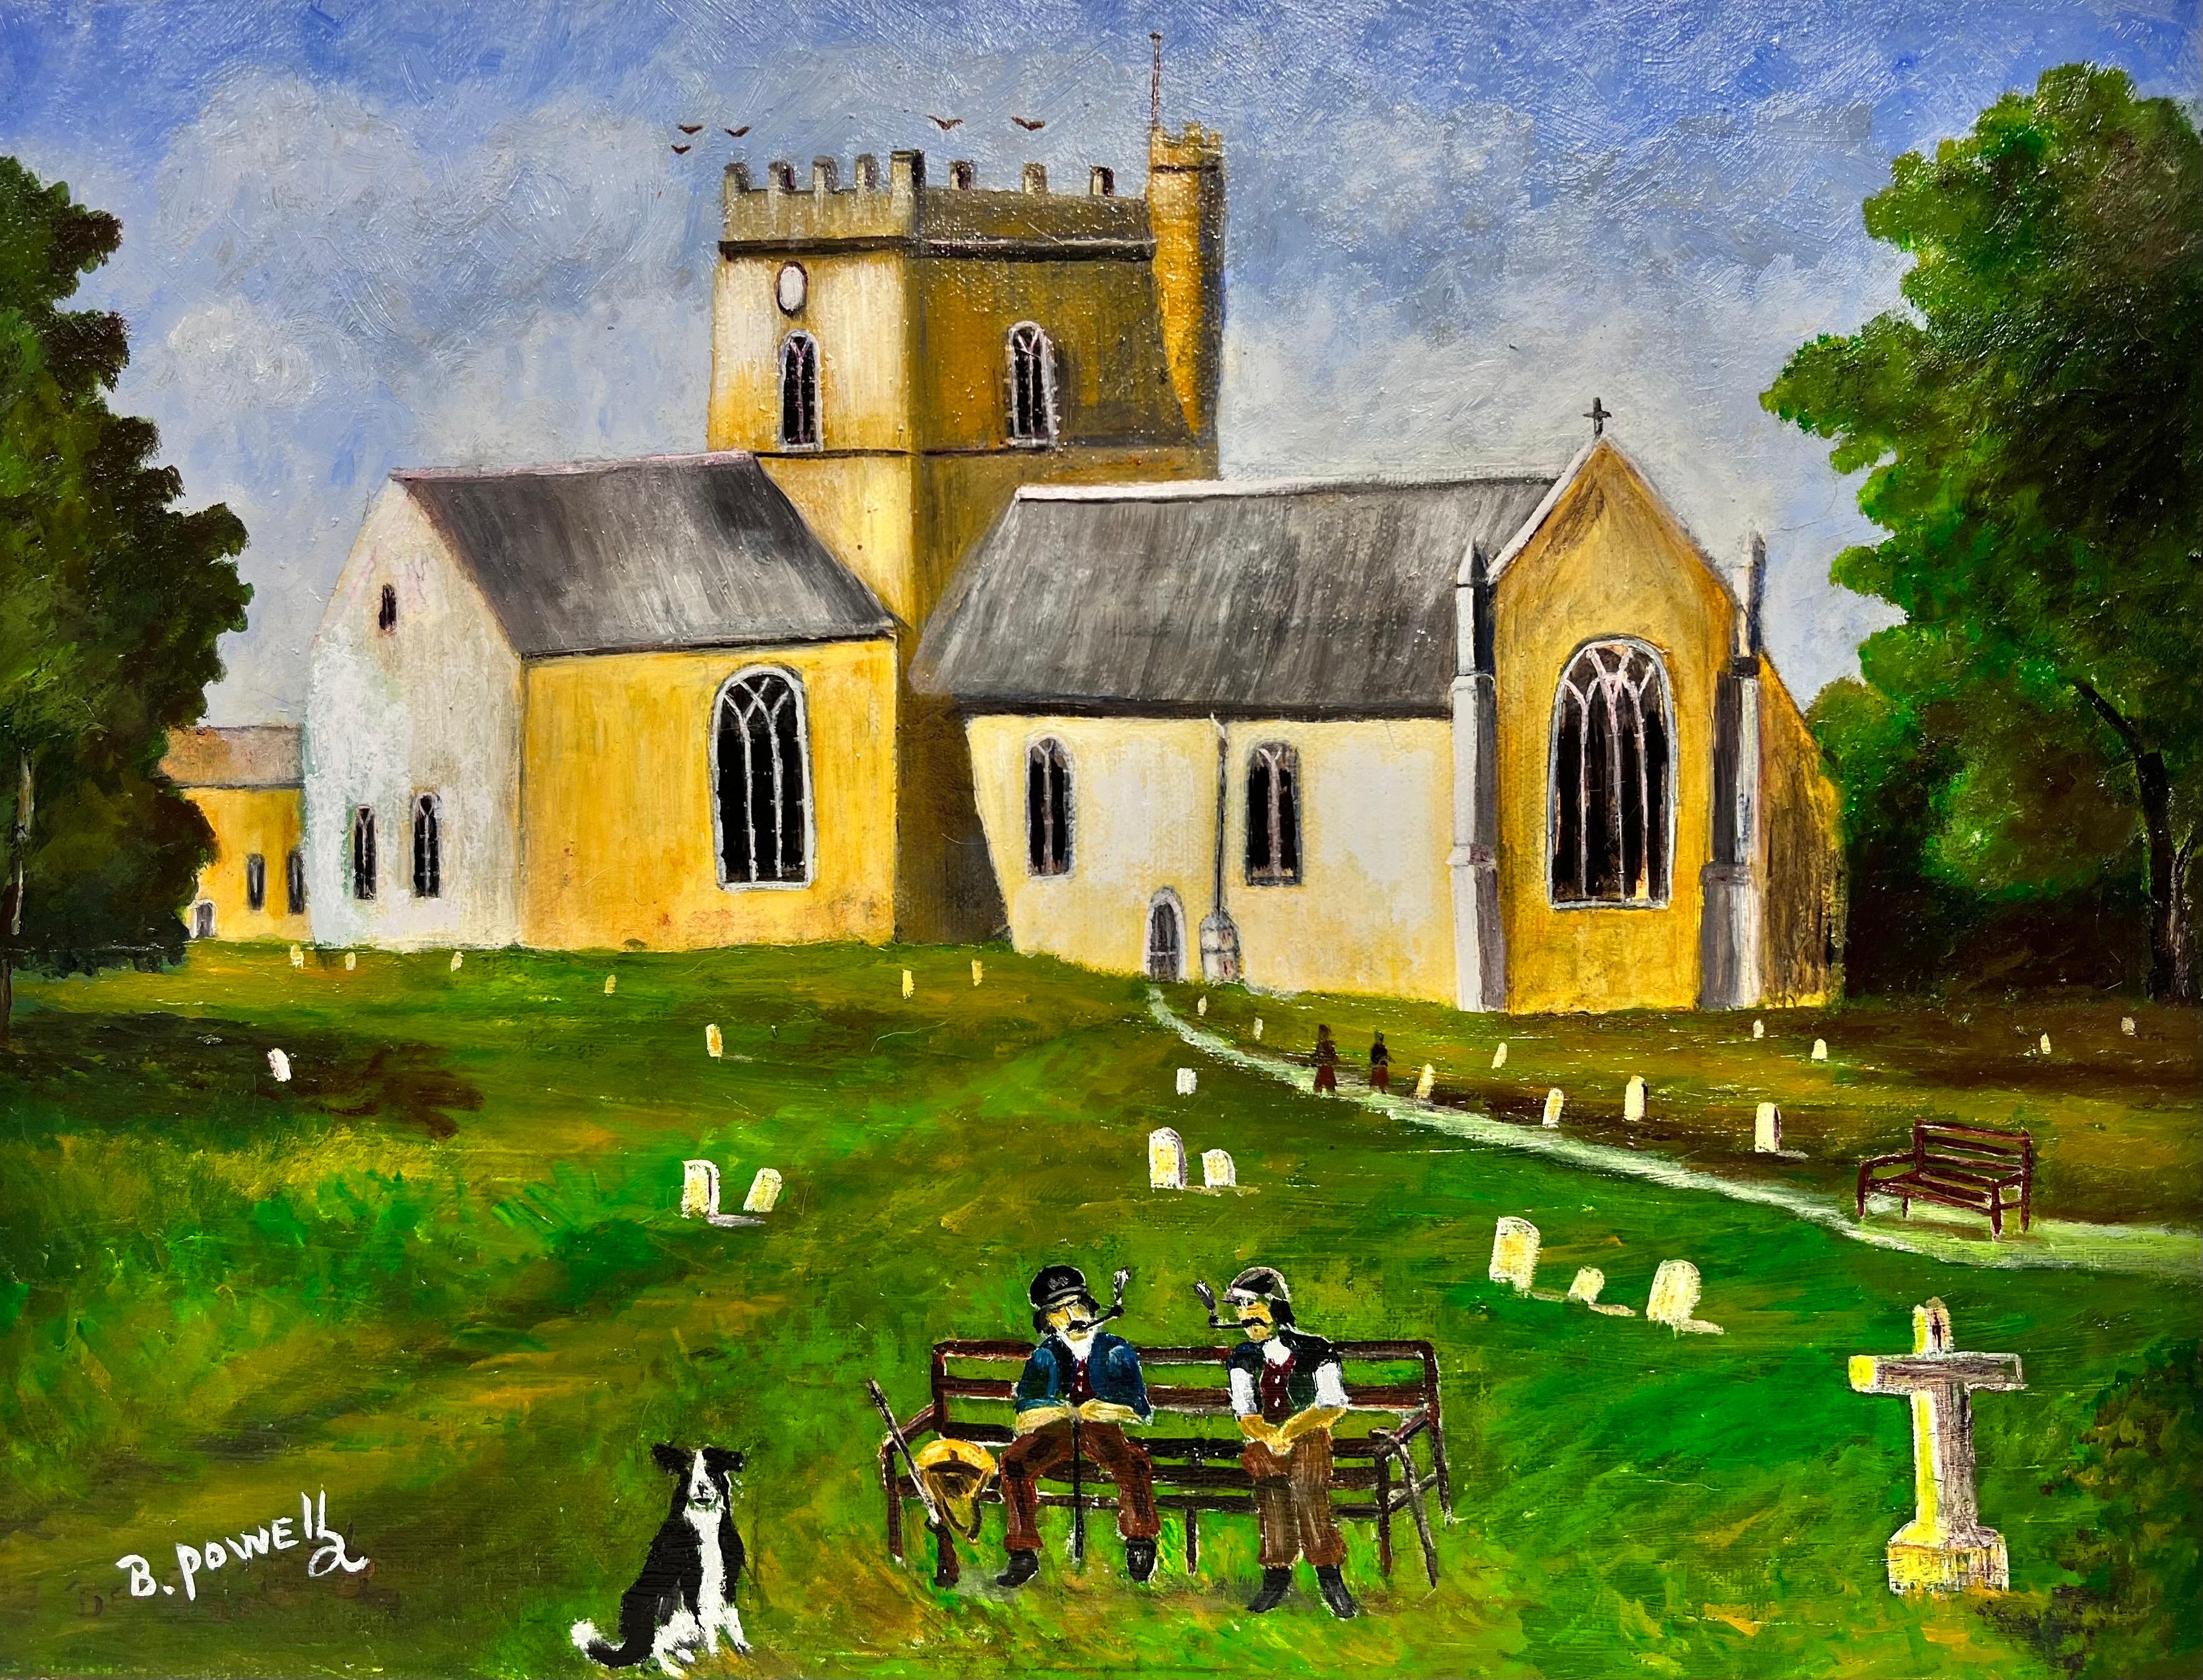 Ben Powell Landscape Painting - English Village Church with Two Men Chatting on Bench Original British Painting